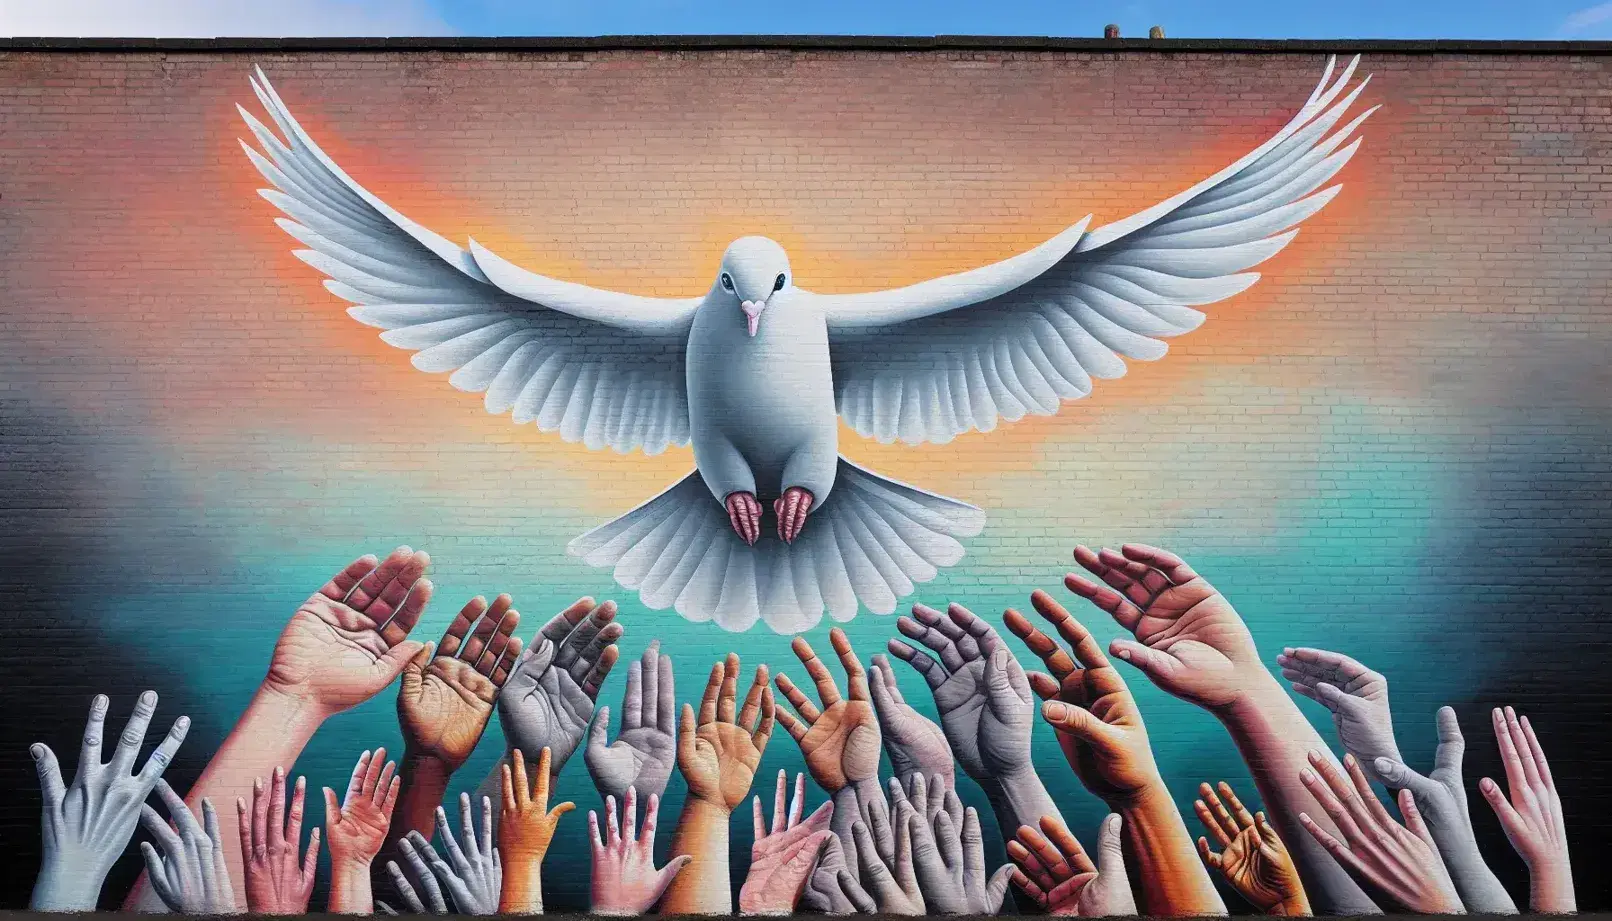 Peace mural with a white dove in flight surrounded by diverse outstretched hands against a gradient blue to green background on a brick wall in Northern Ireland.